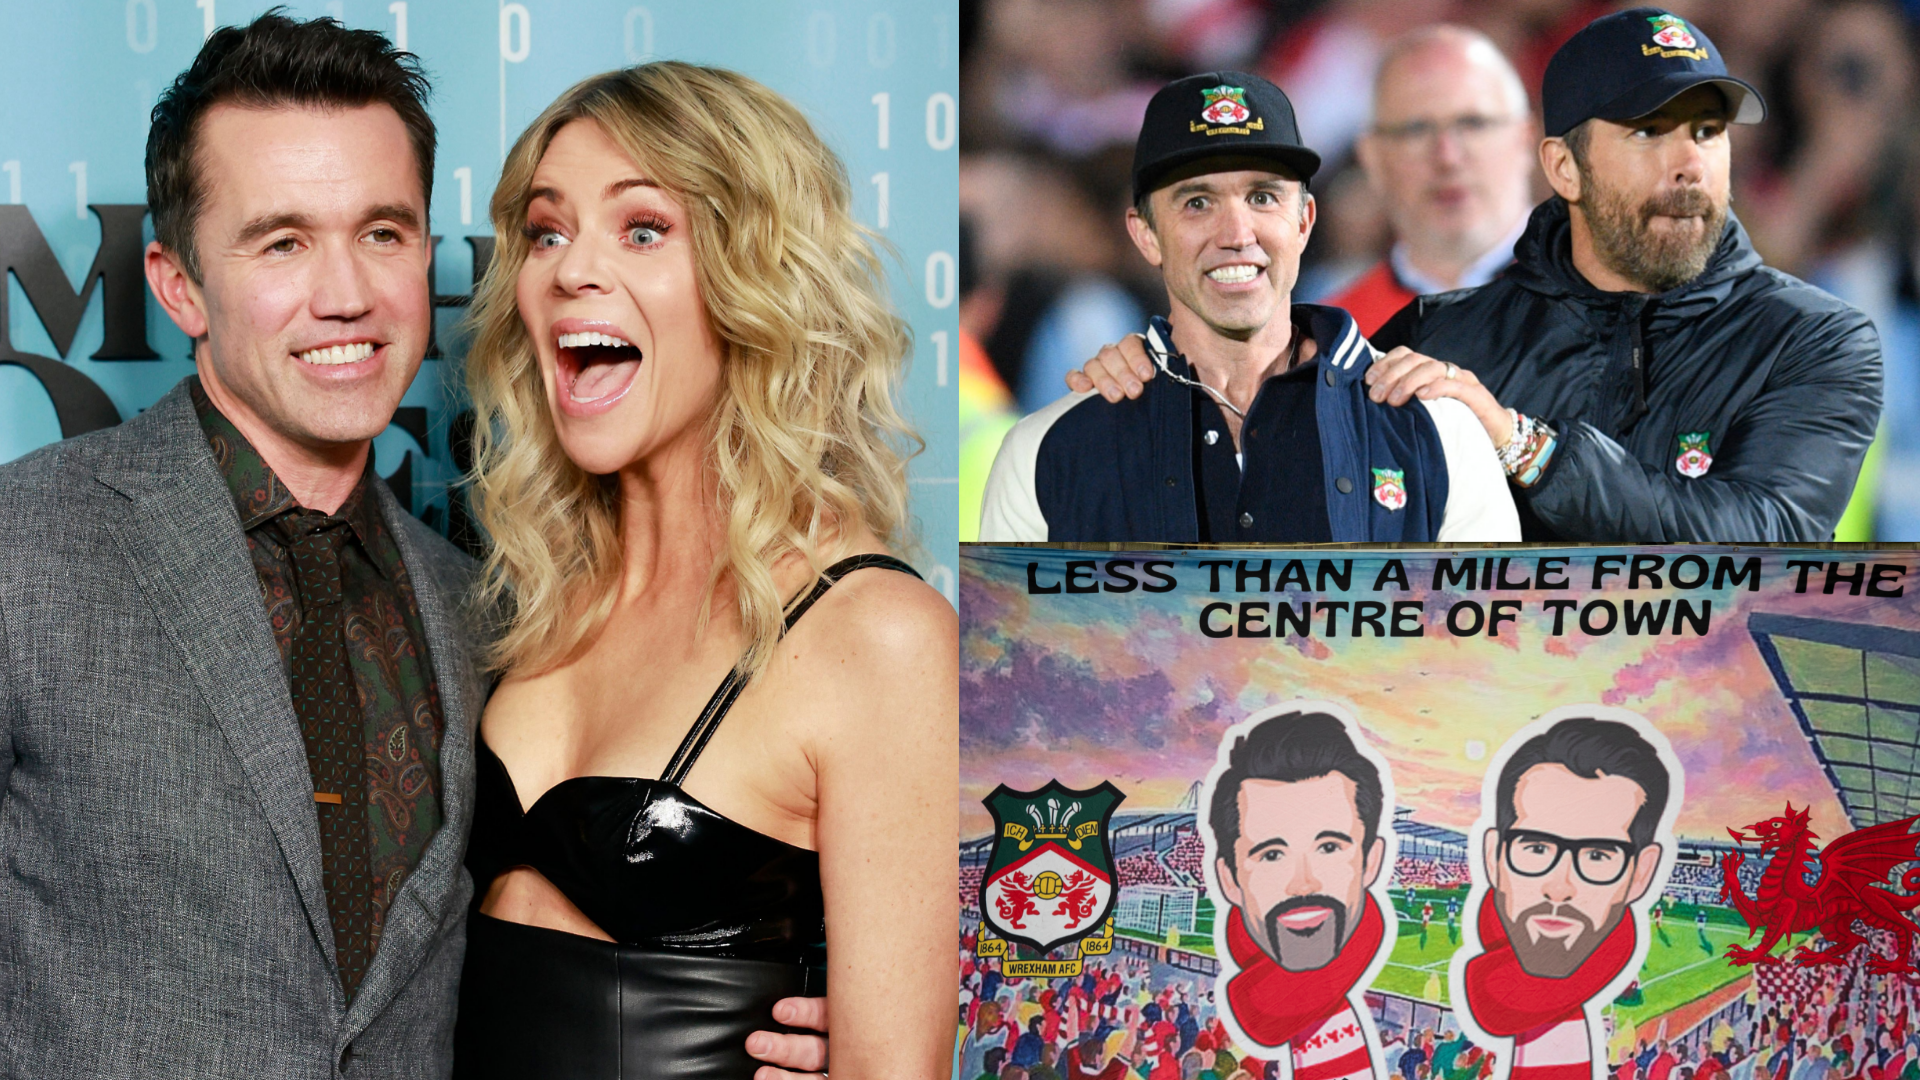 ‘Hey c***, check your Instagram!’ - Rob McElhenney uses wife Kaitlin Olson to highlight C-word challenge he faces alongside fellow Hollywood co-owner Ryan Reynolds at Wrexham